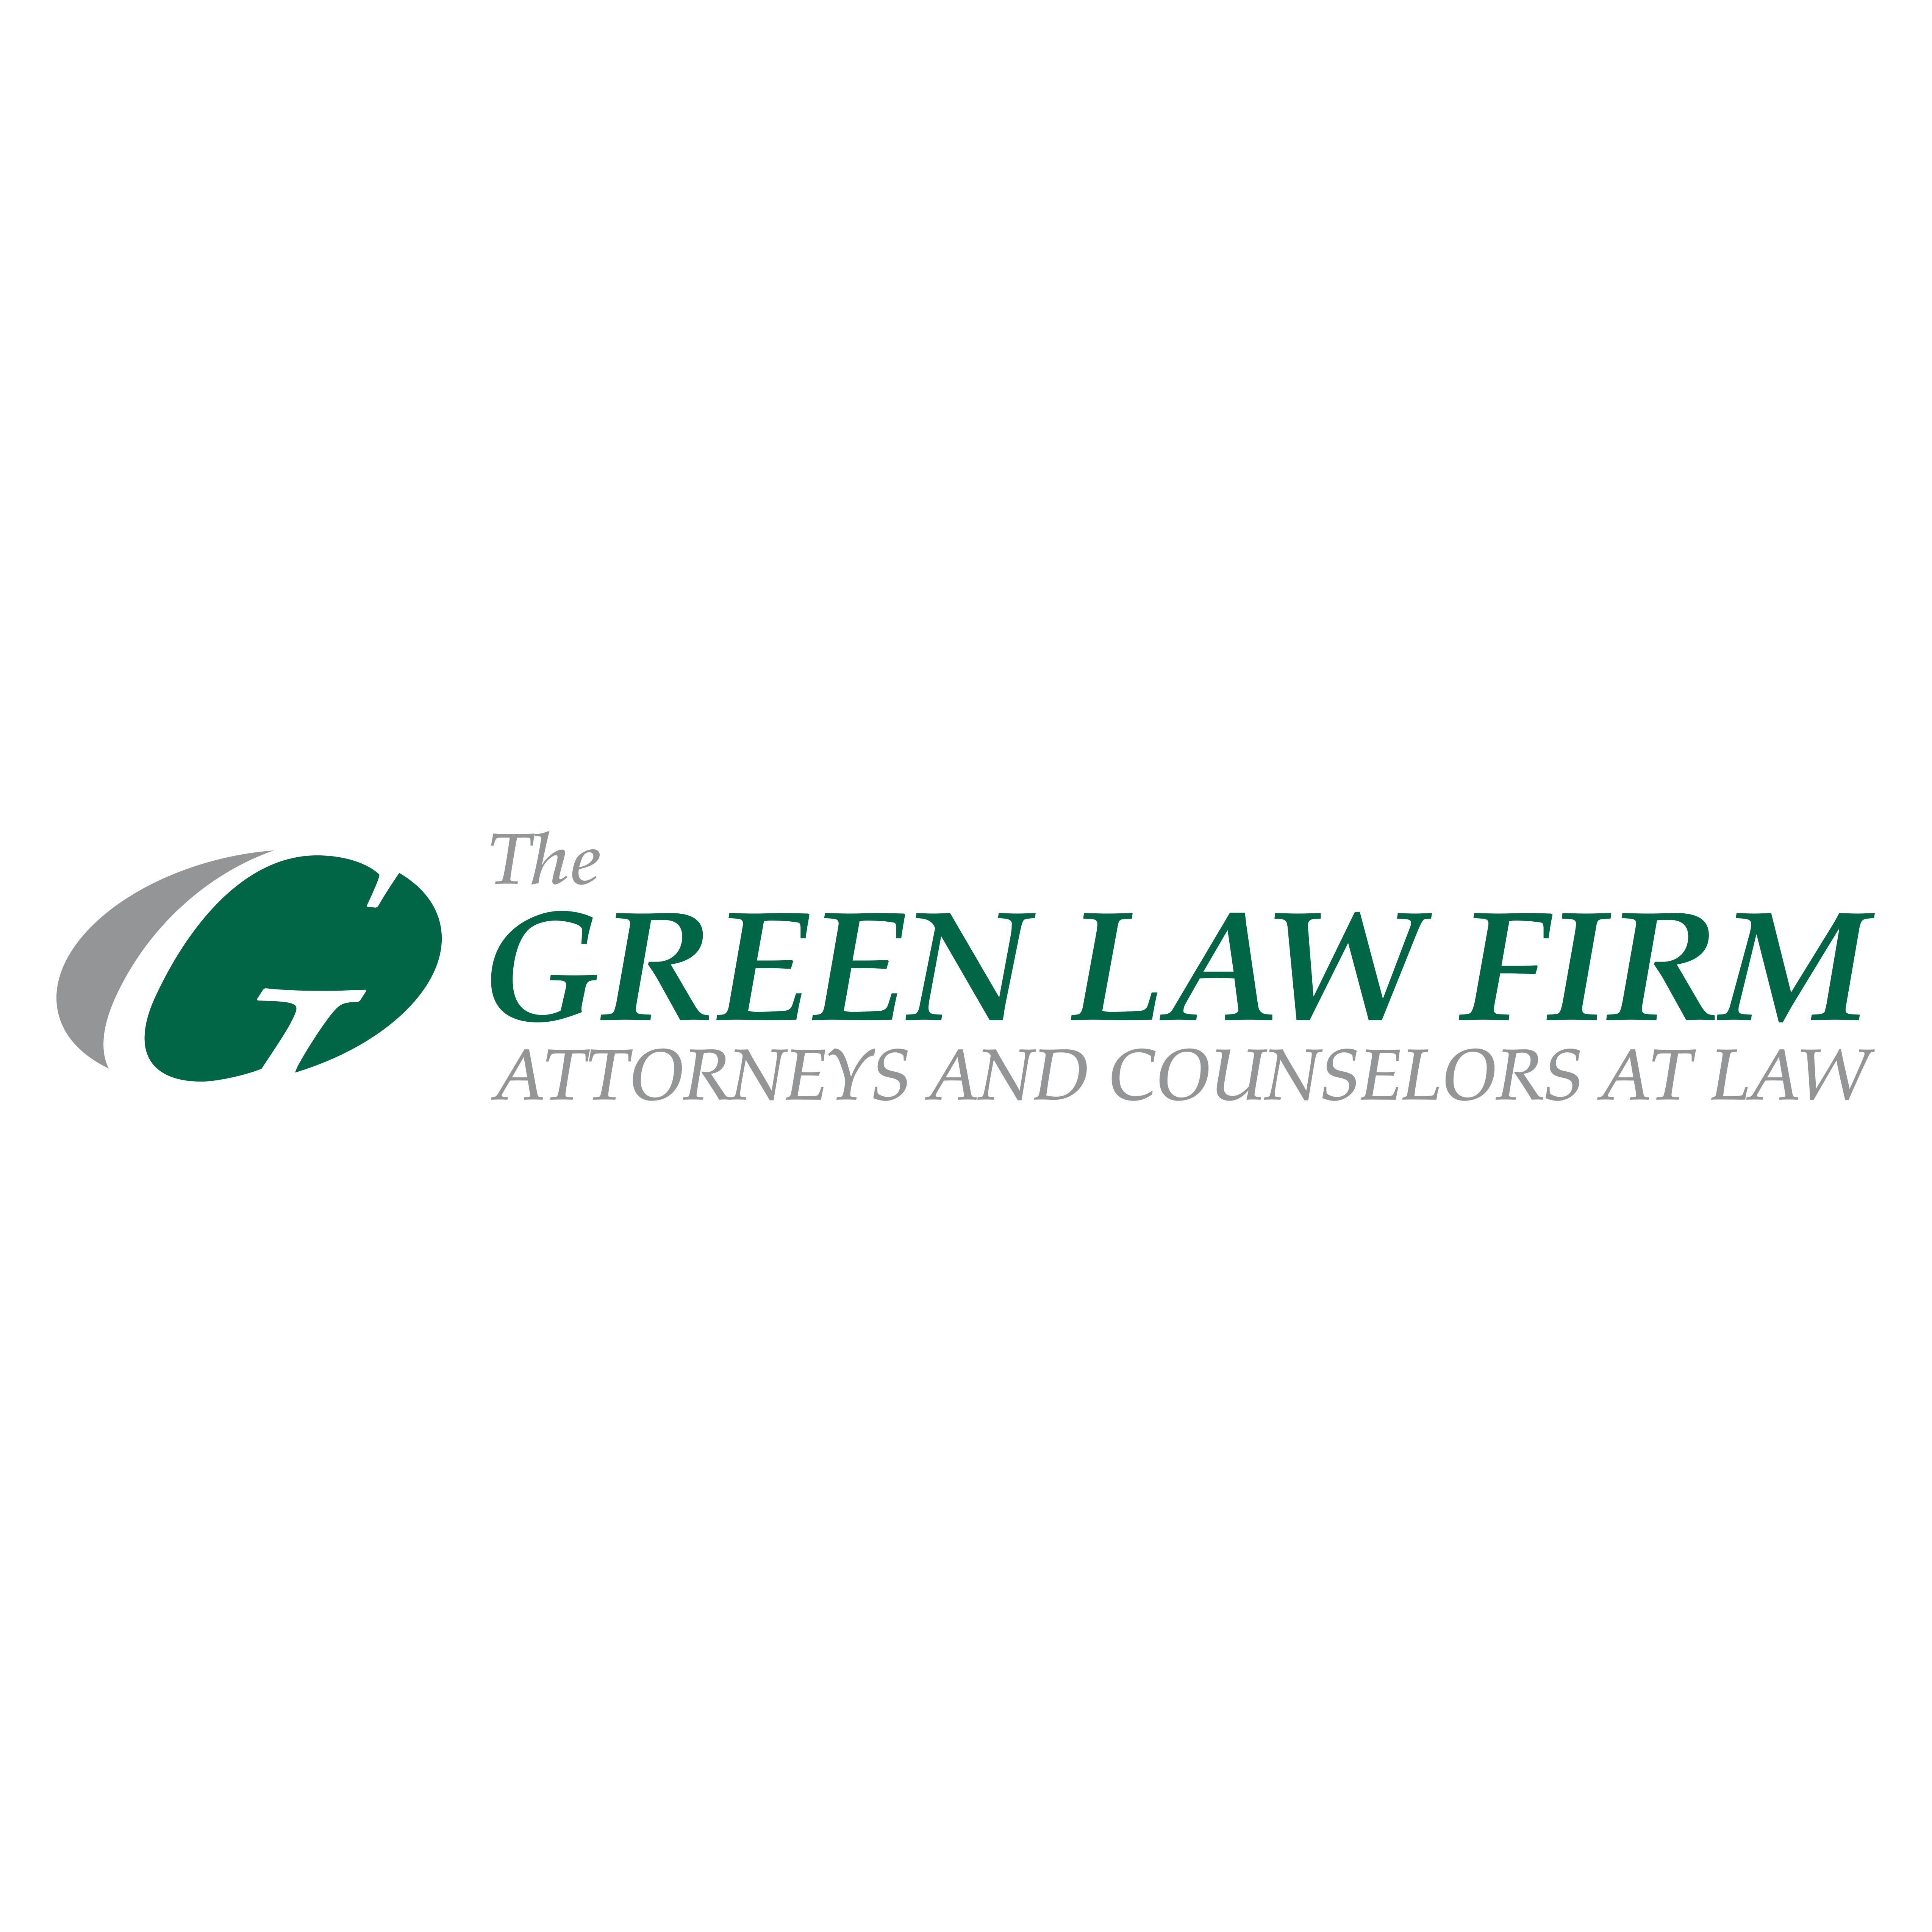 The Green Law Firm, PC